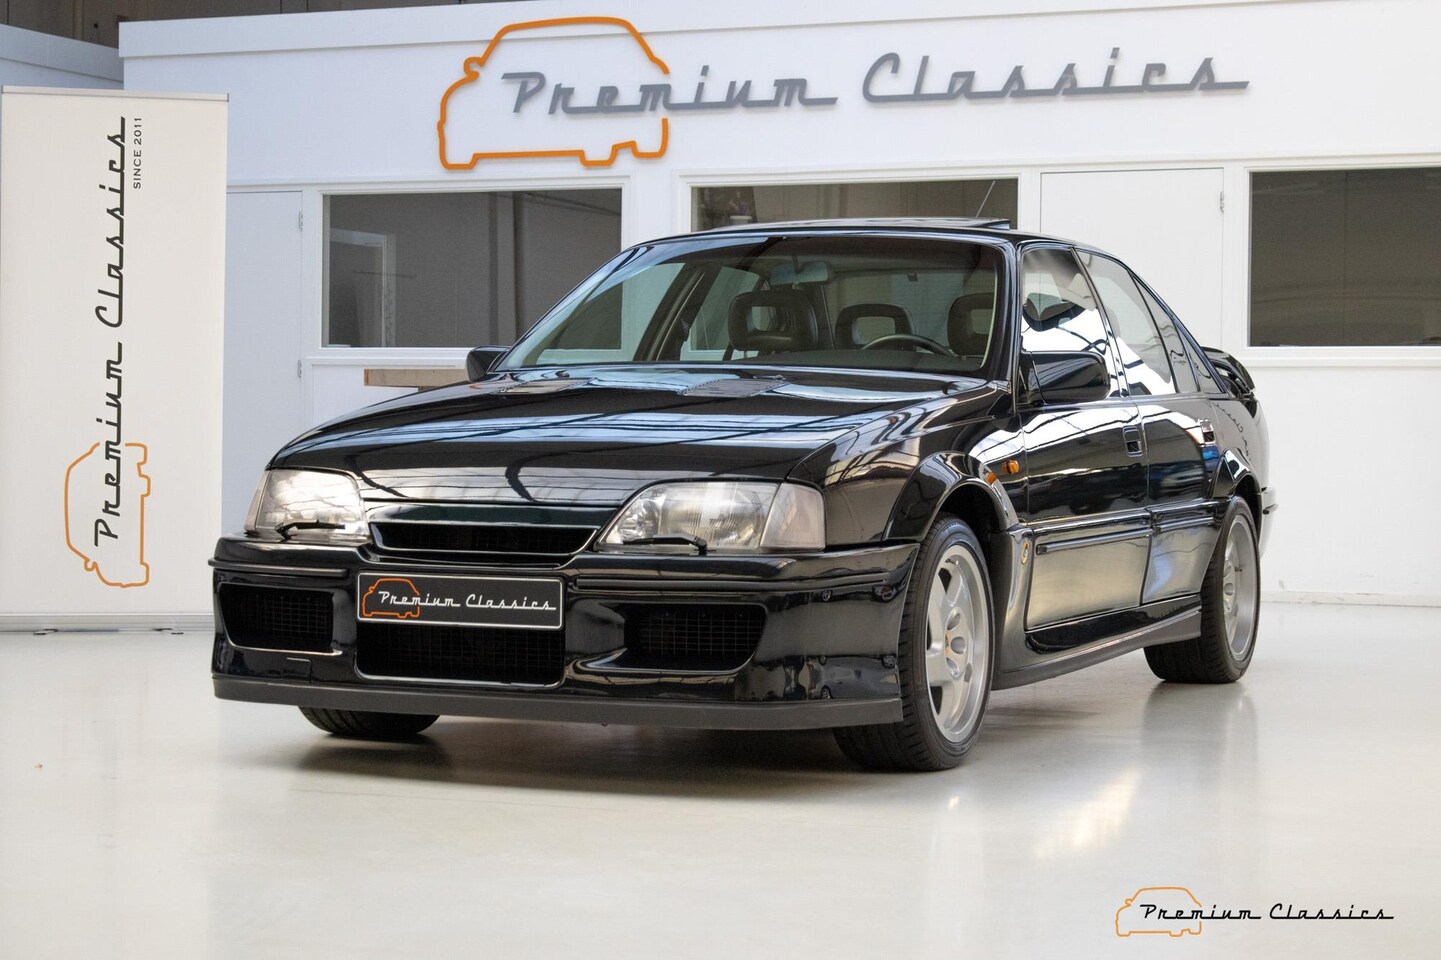 Opel Omega - Lotus 3.6 twin-turbo | 95.000KM! 1 of 630 | Perfect condition - AutoWereld.nl